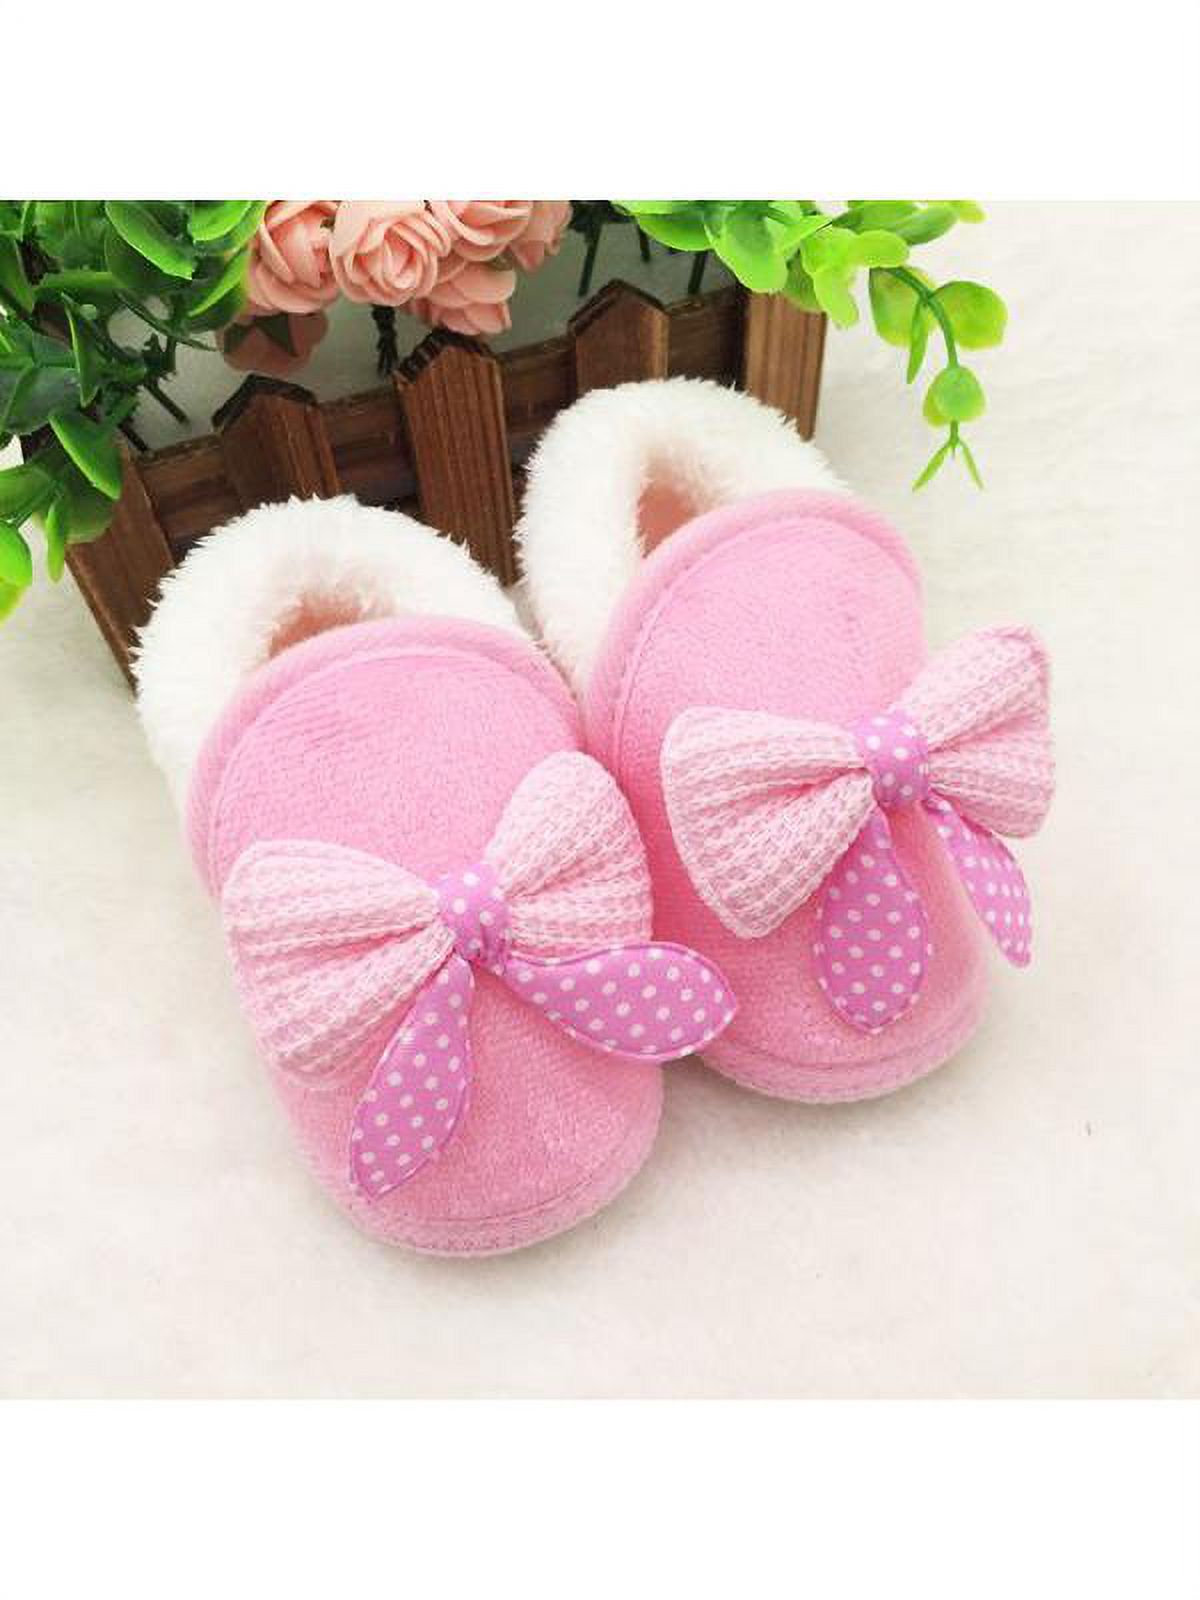 Taykoo Winter Warm Baby Boys Girls Slippers Non Slip Snow Boots Crib Casual Shoes 0-18M - image 1 of 3